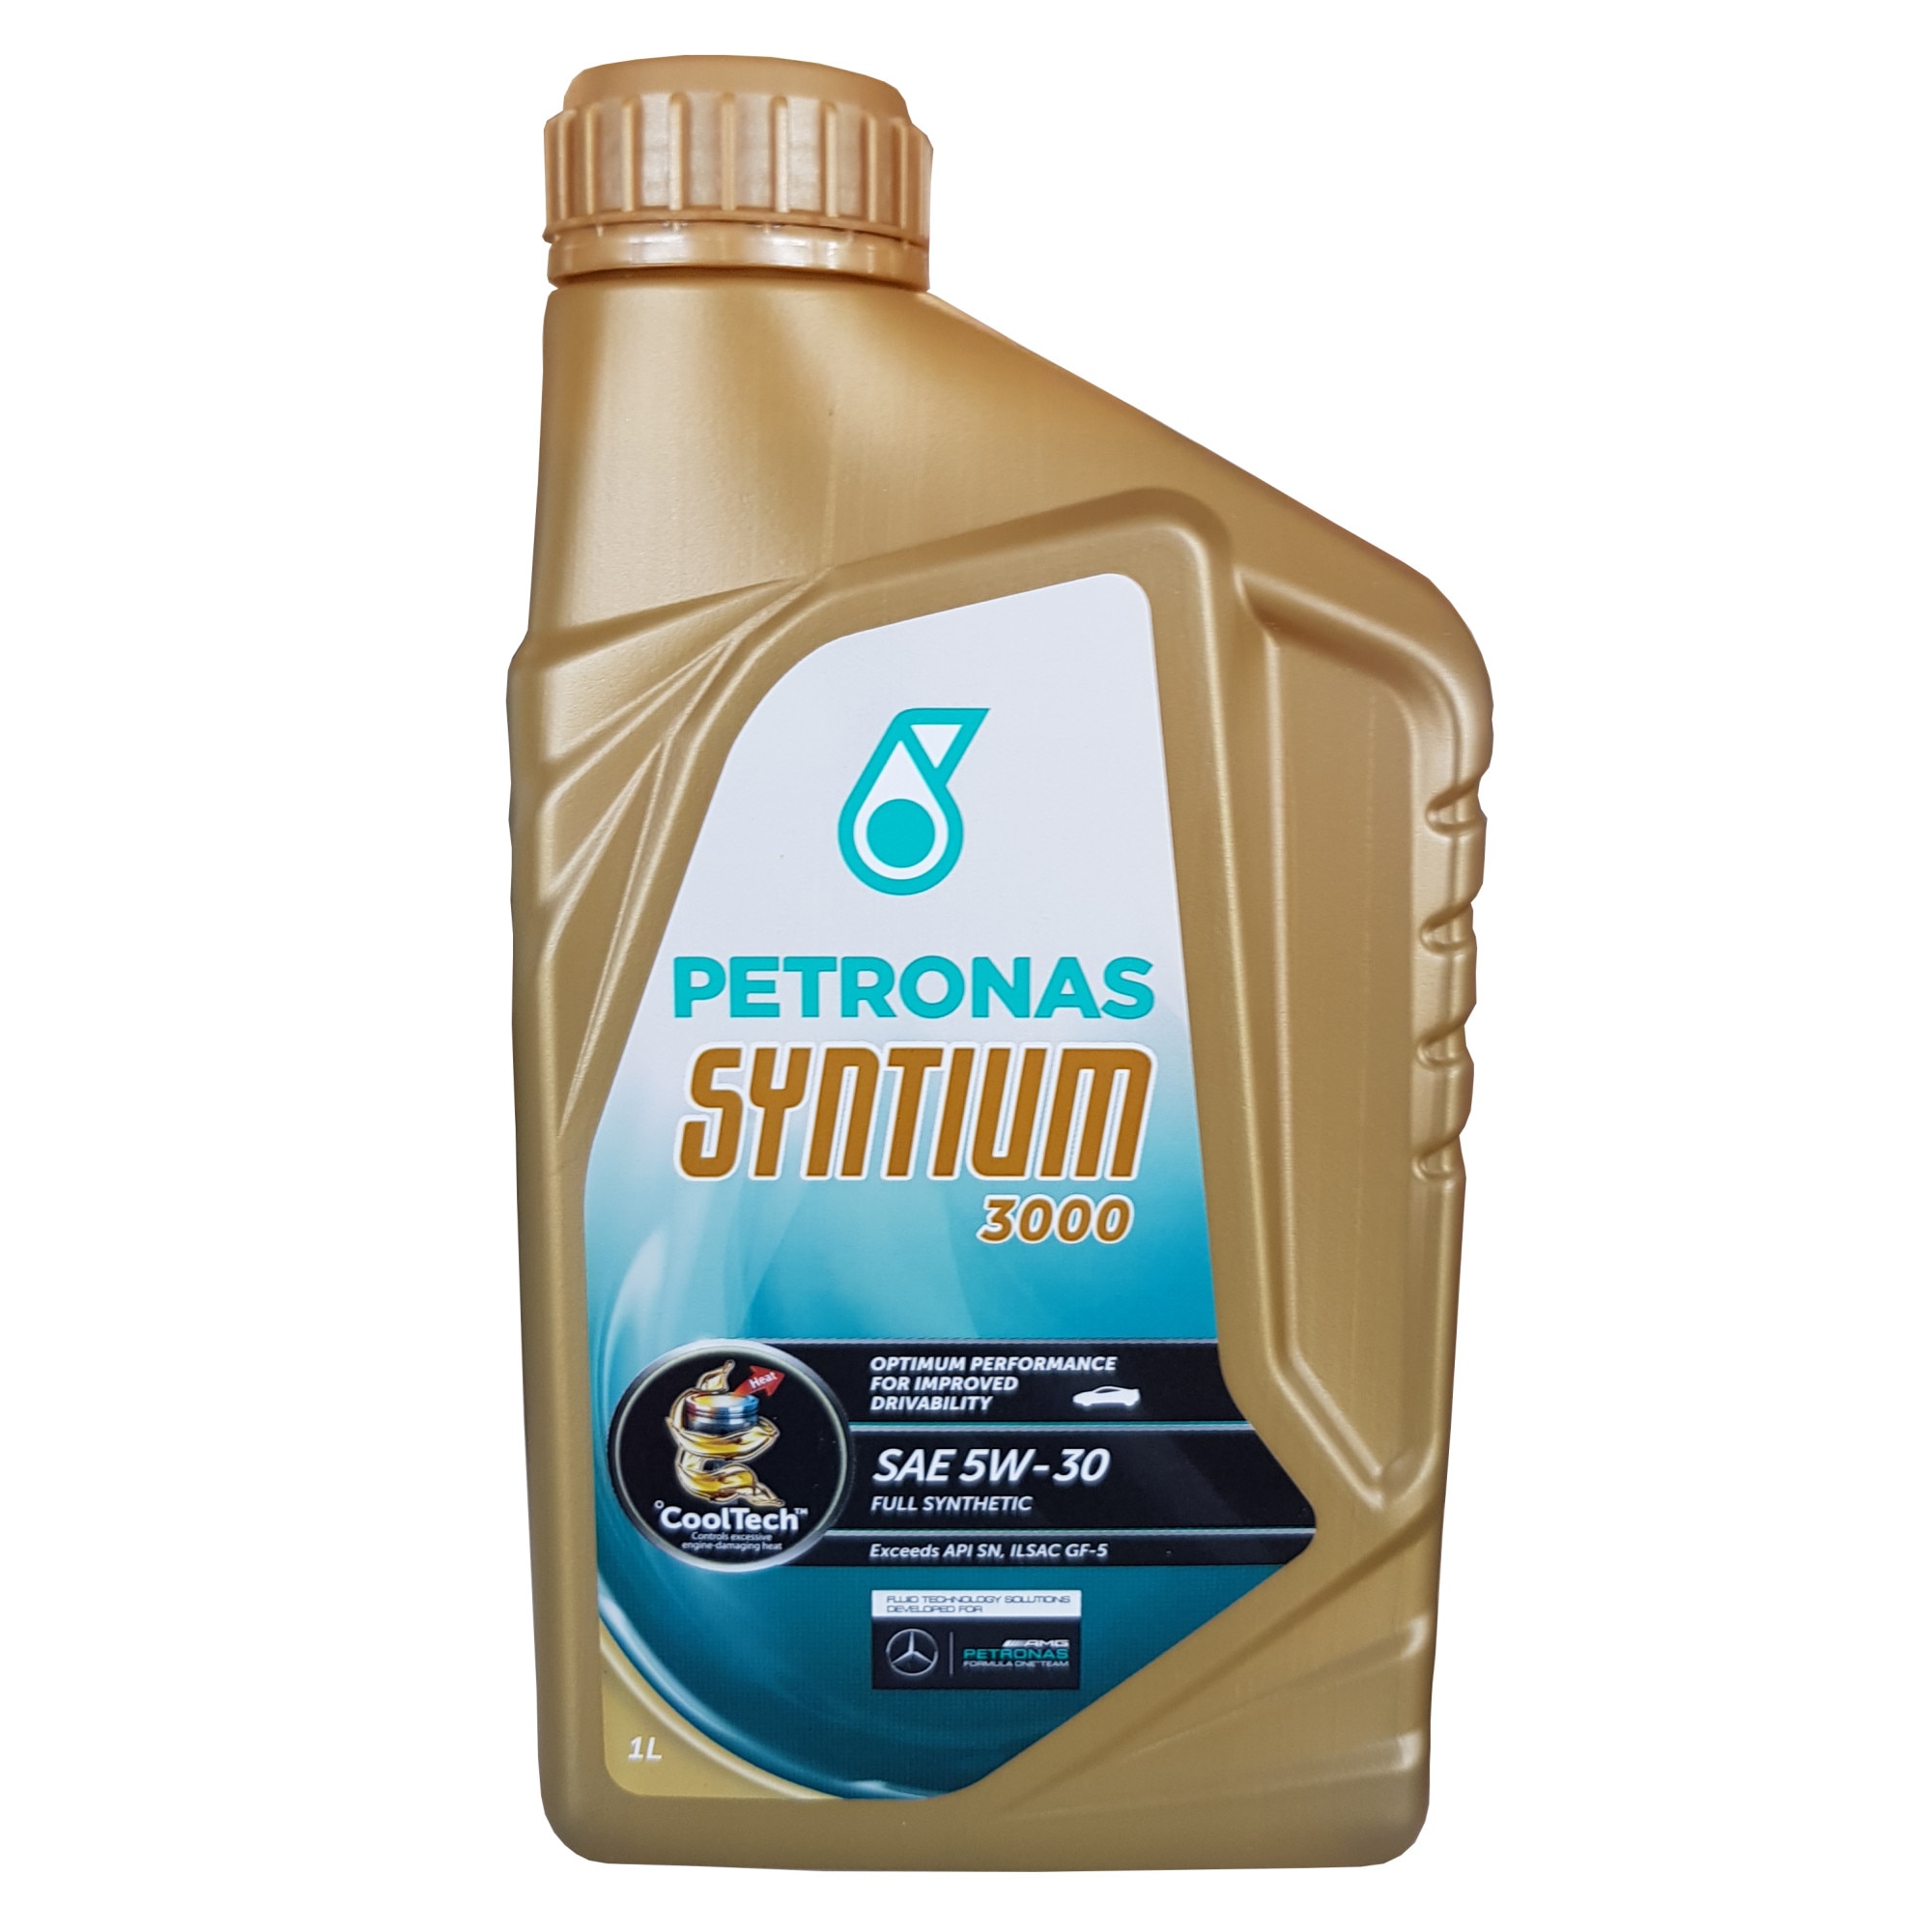 Petronas 5w30. Petronas 5000 5w40. Petronas 5w30av Pao. Петронас масло 5w30